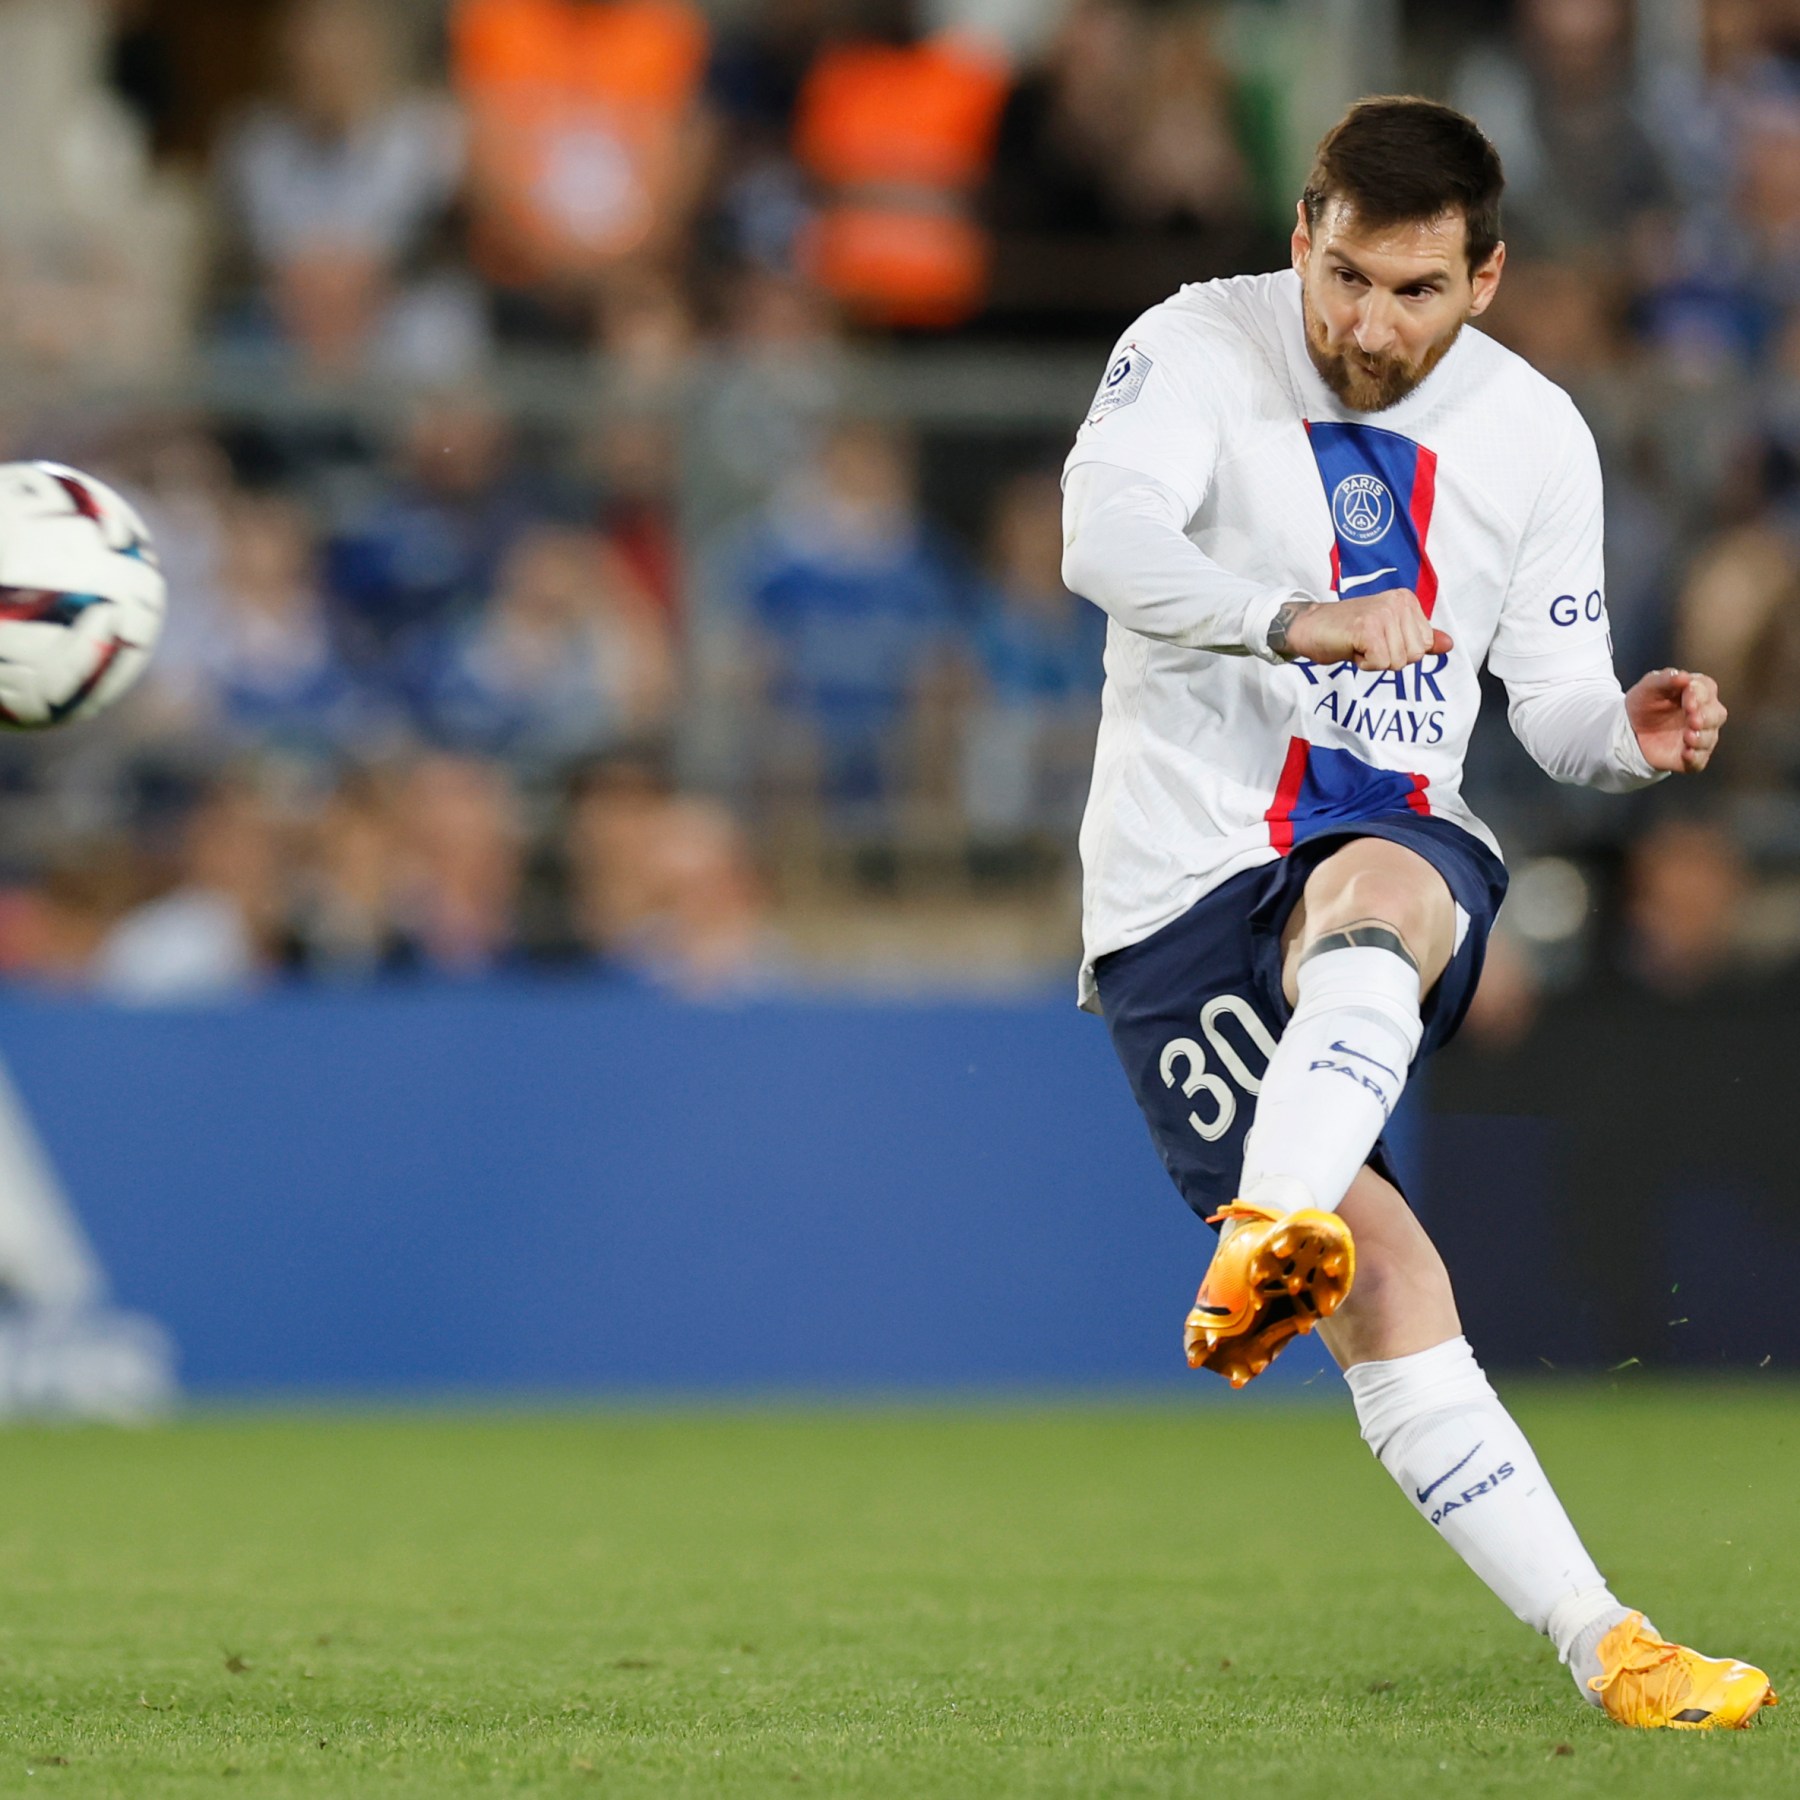 Messi to leave Paris St-Germain at end of season, coach confirms, Football  News